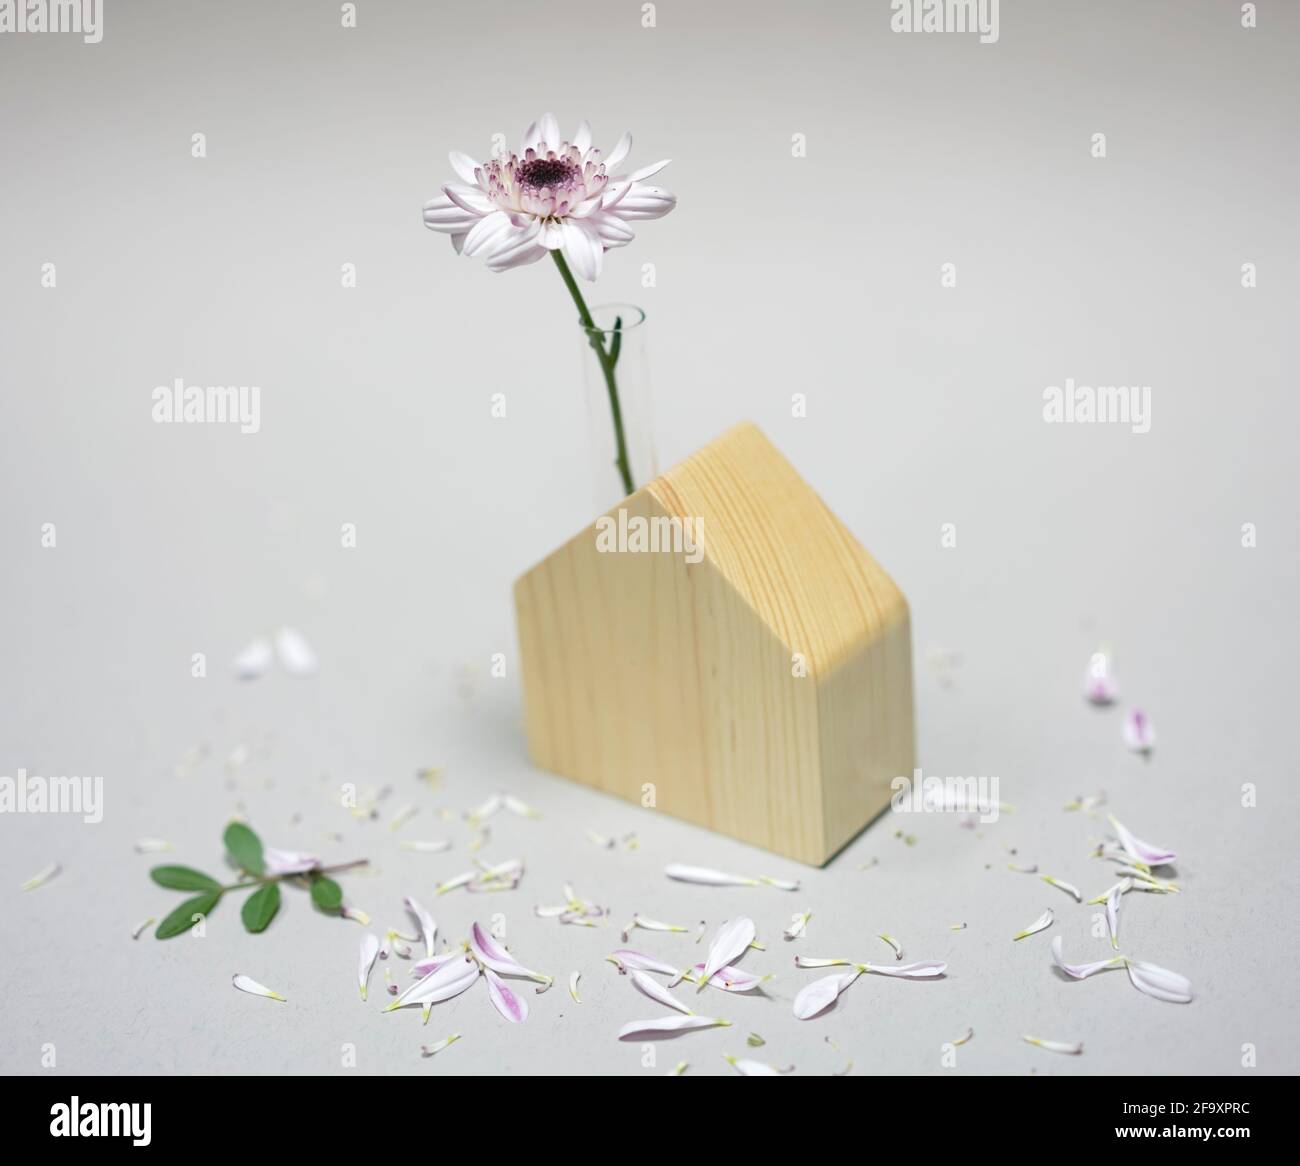 Flower in a wooden model of the house with scattered petals around Stock Photo